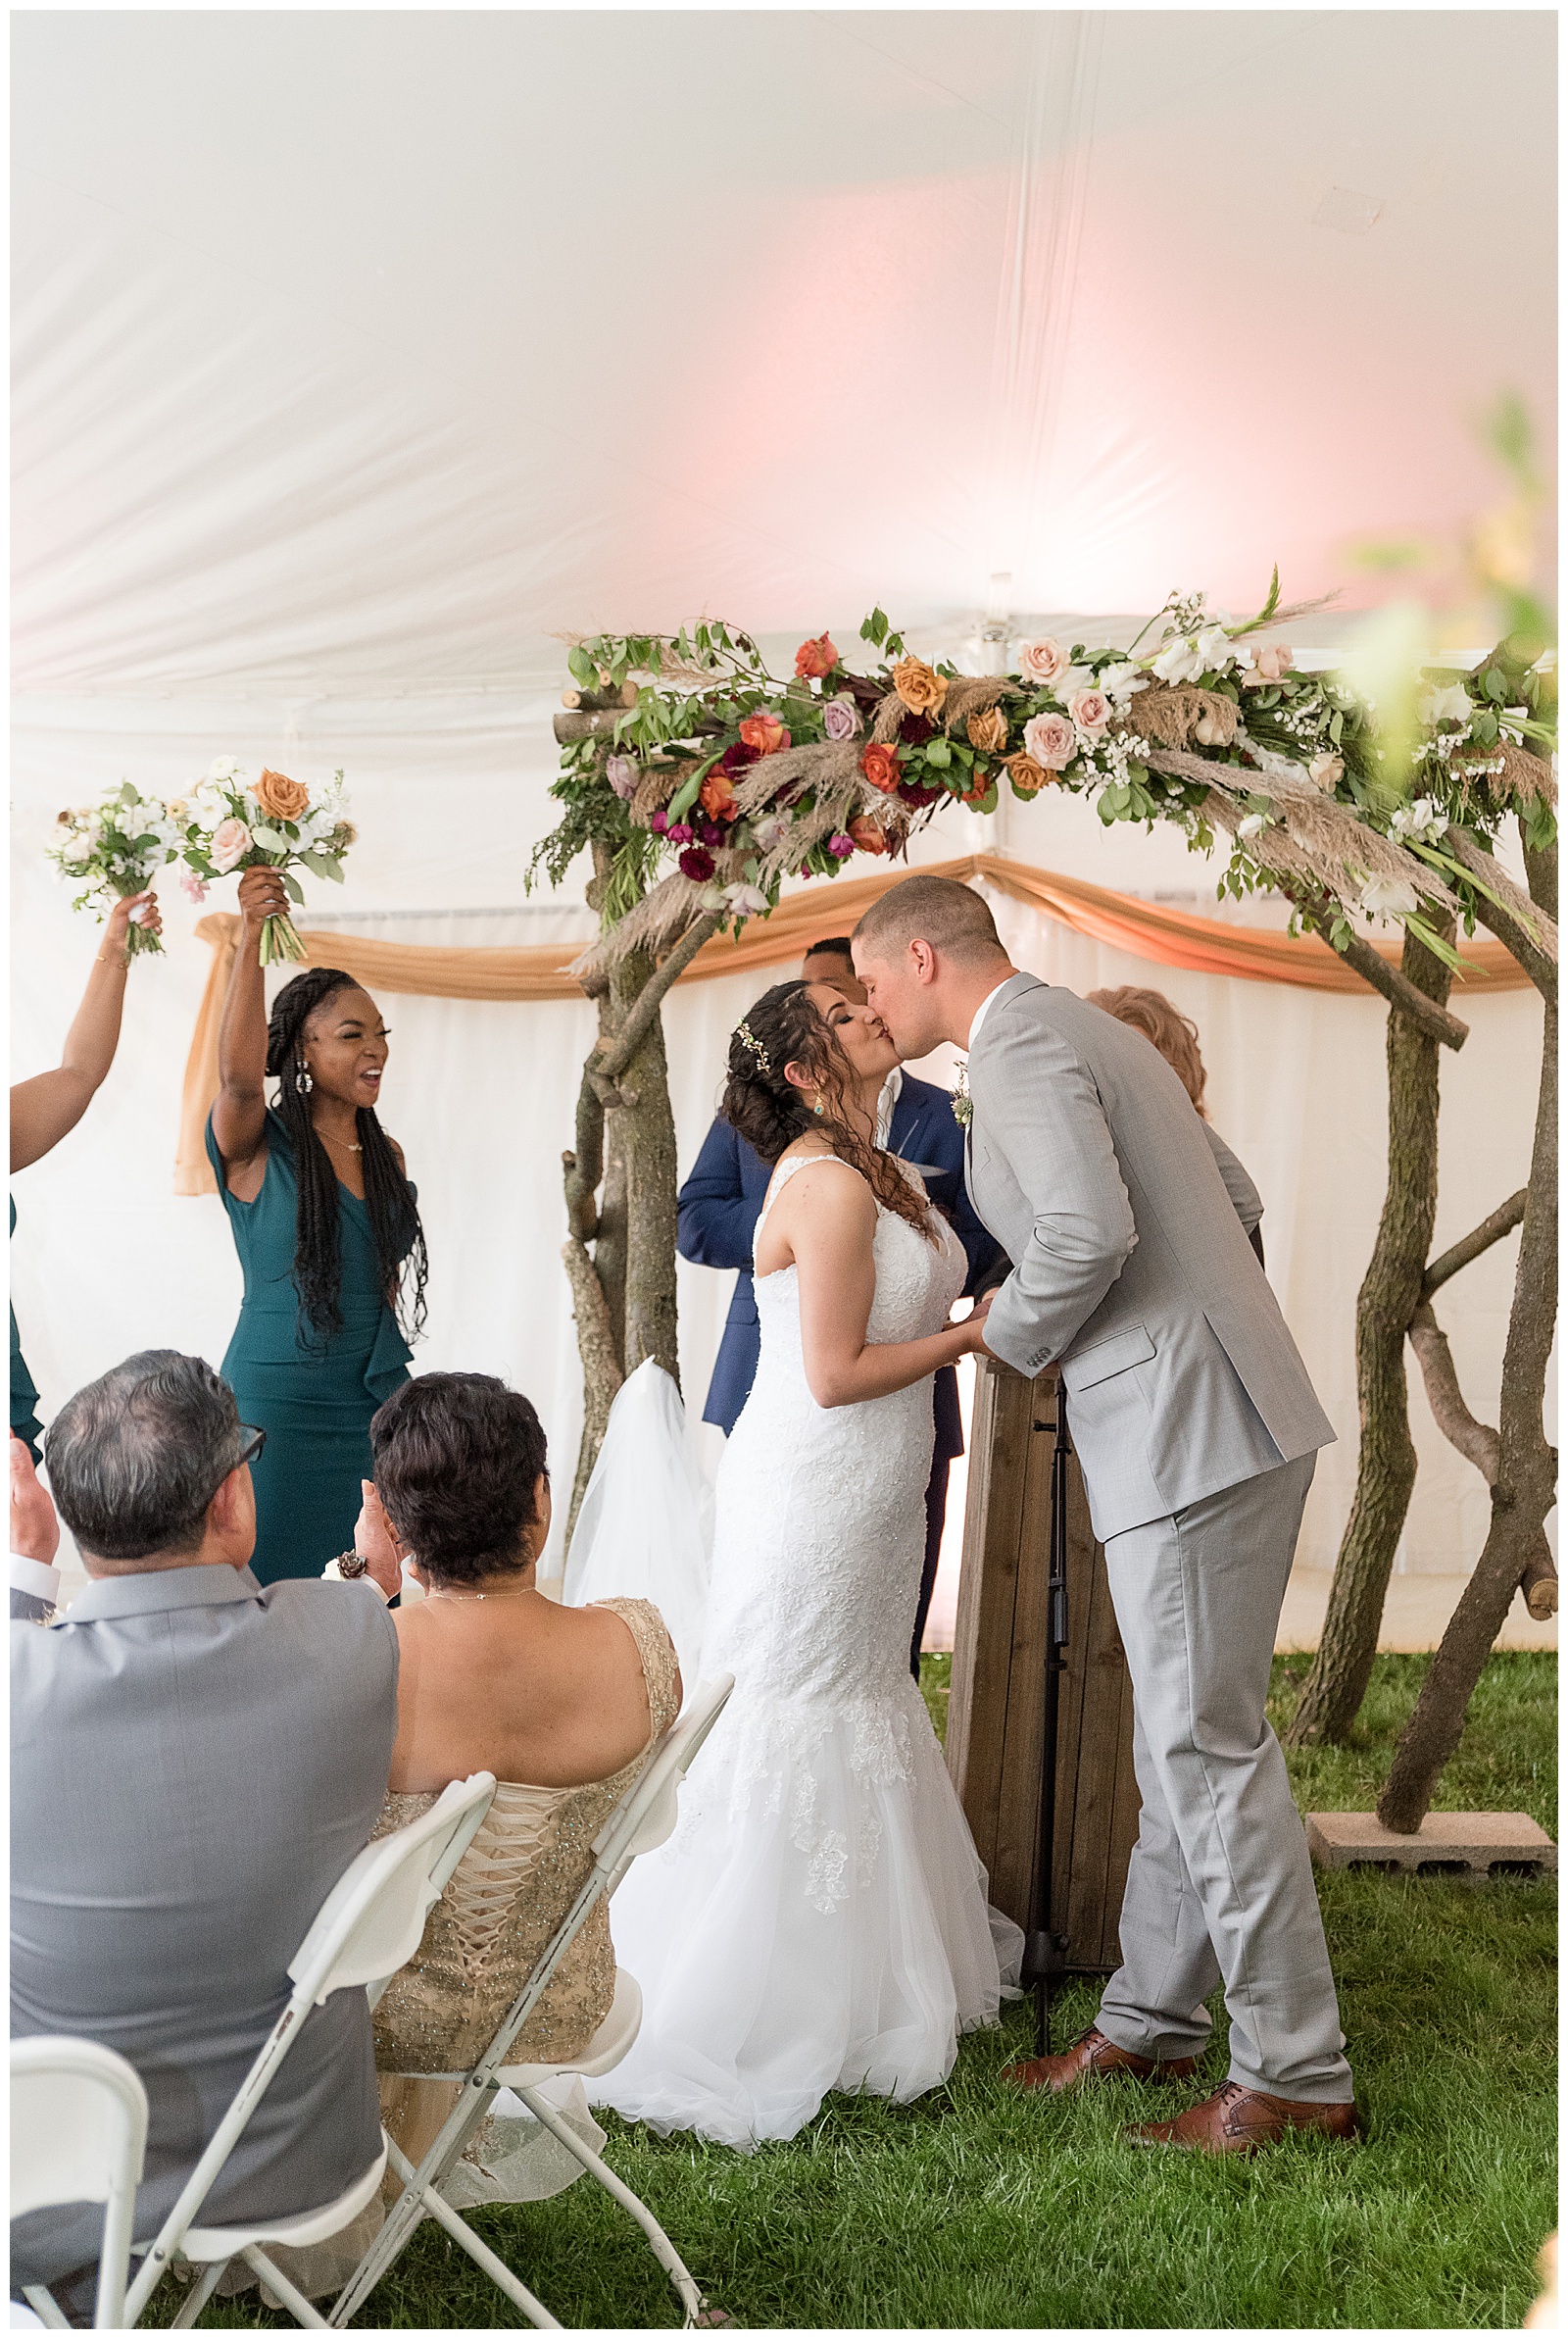 bride and groom kiss inside intimate white tent wedding ceremony as guests cheer